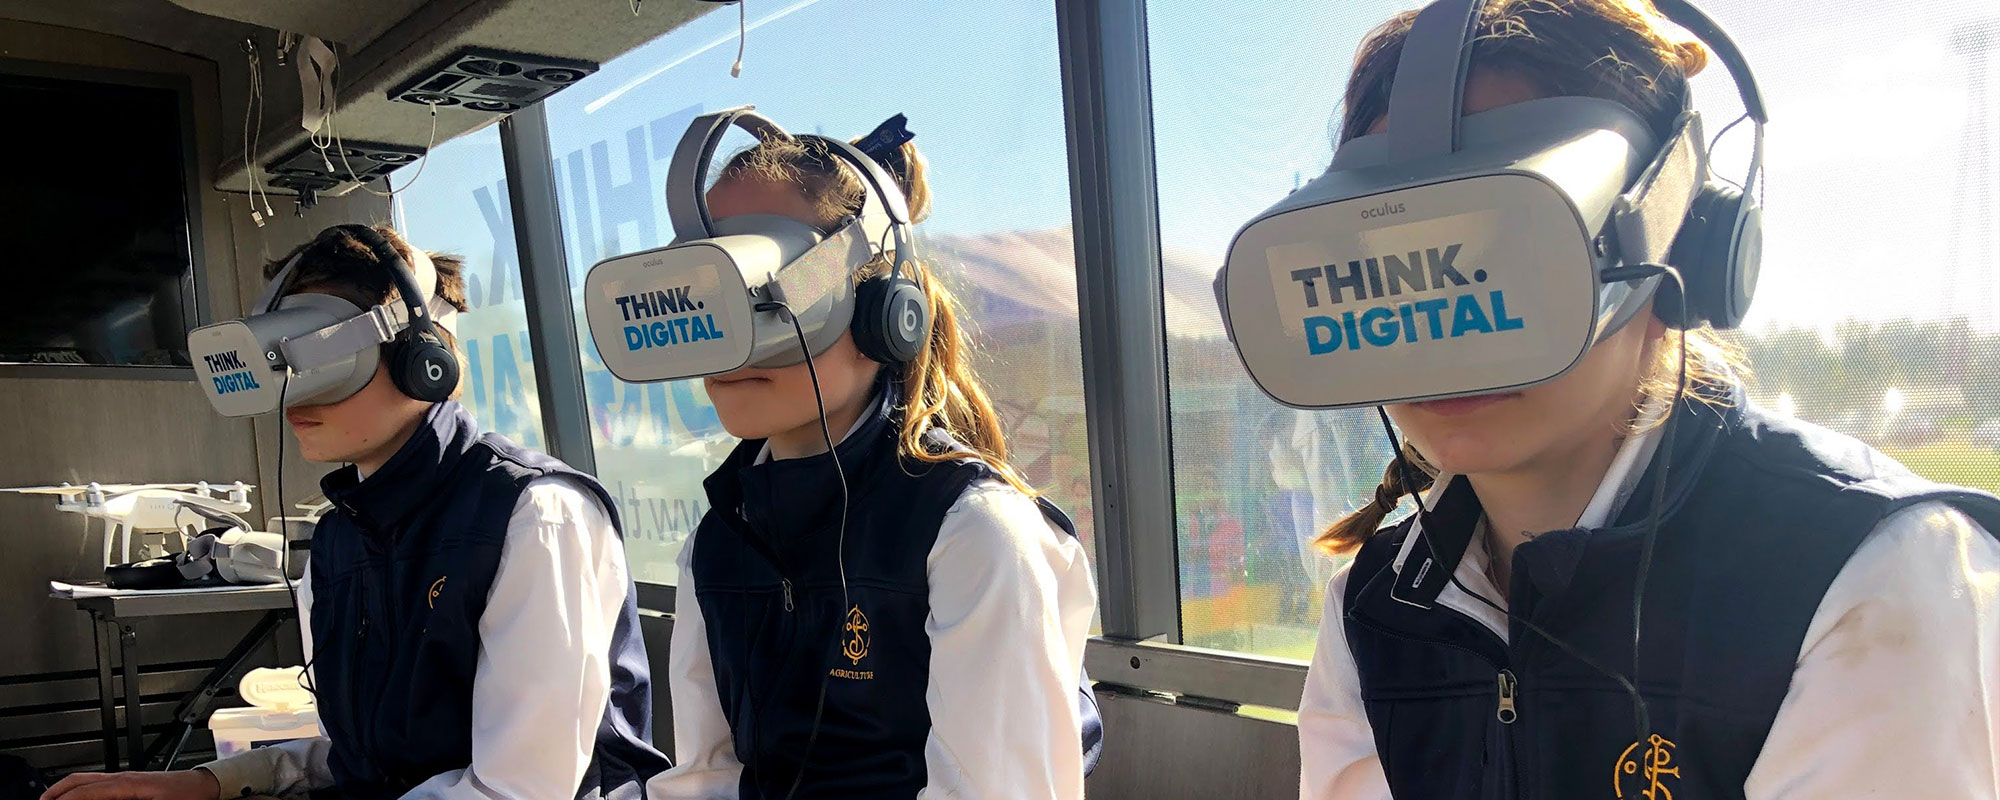 Think Digital - Kids experiencing VR on the bus